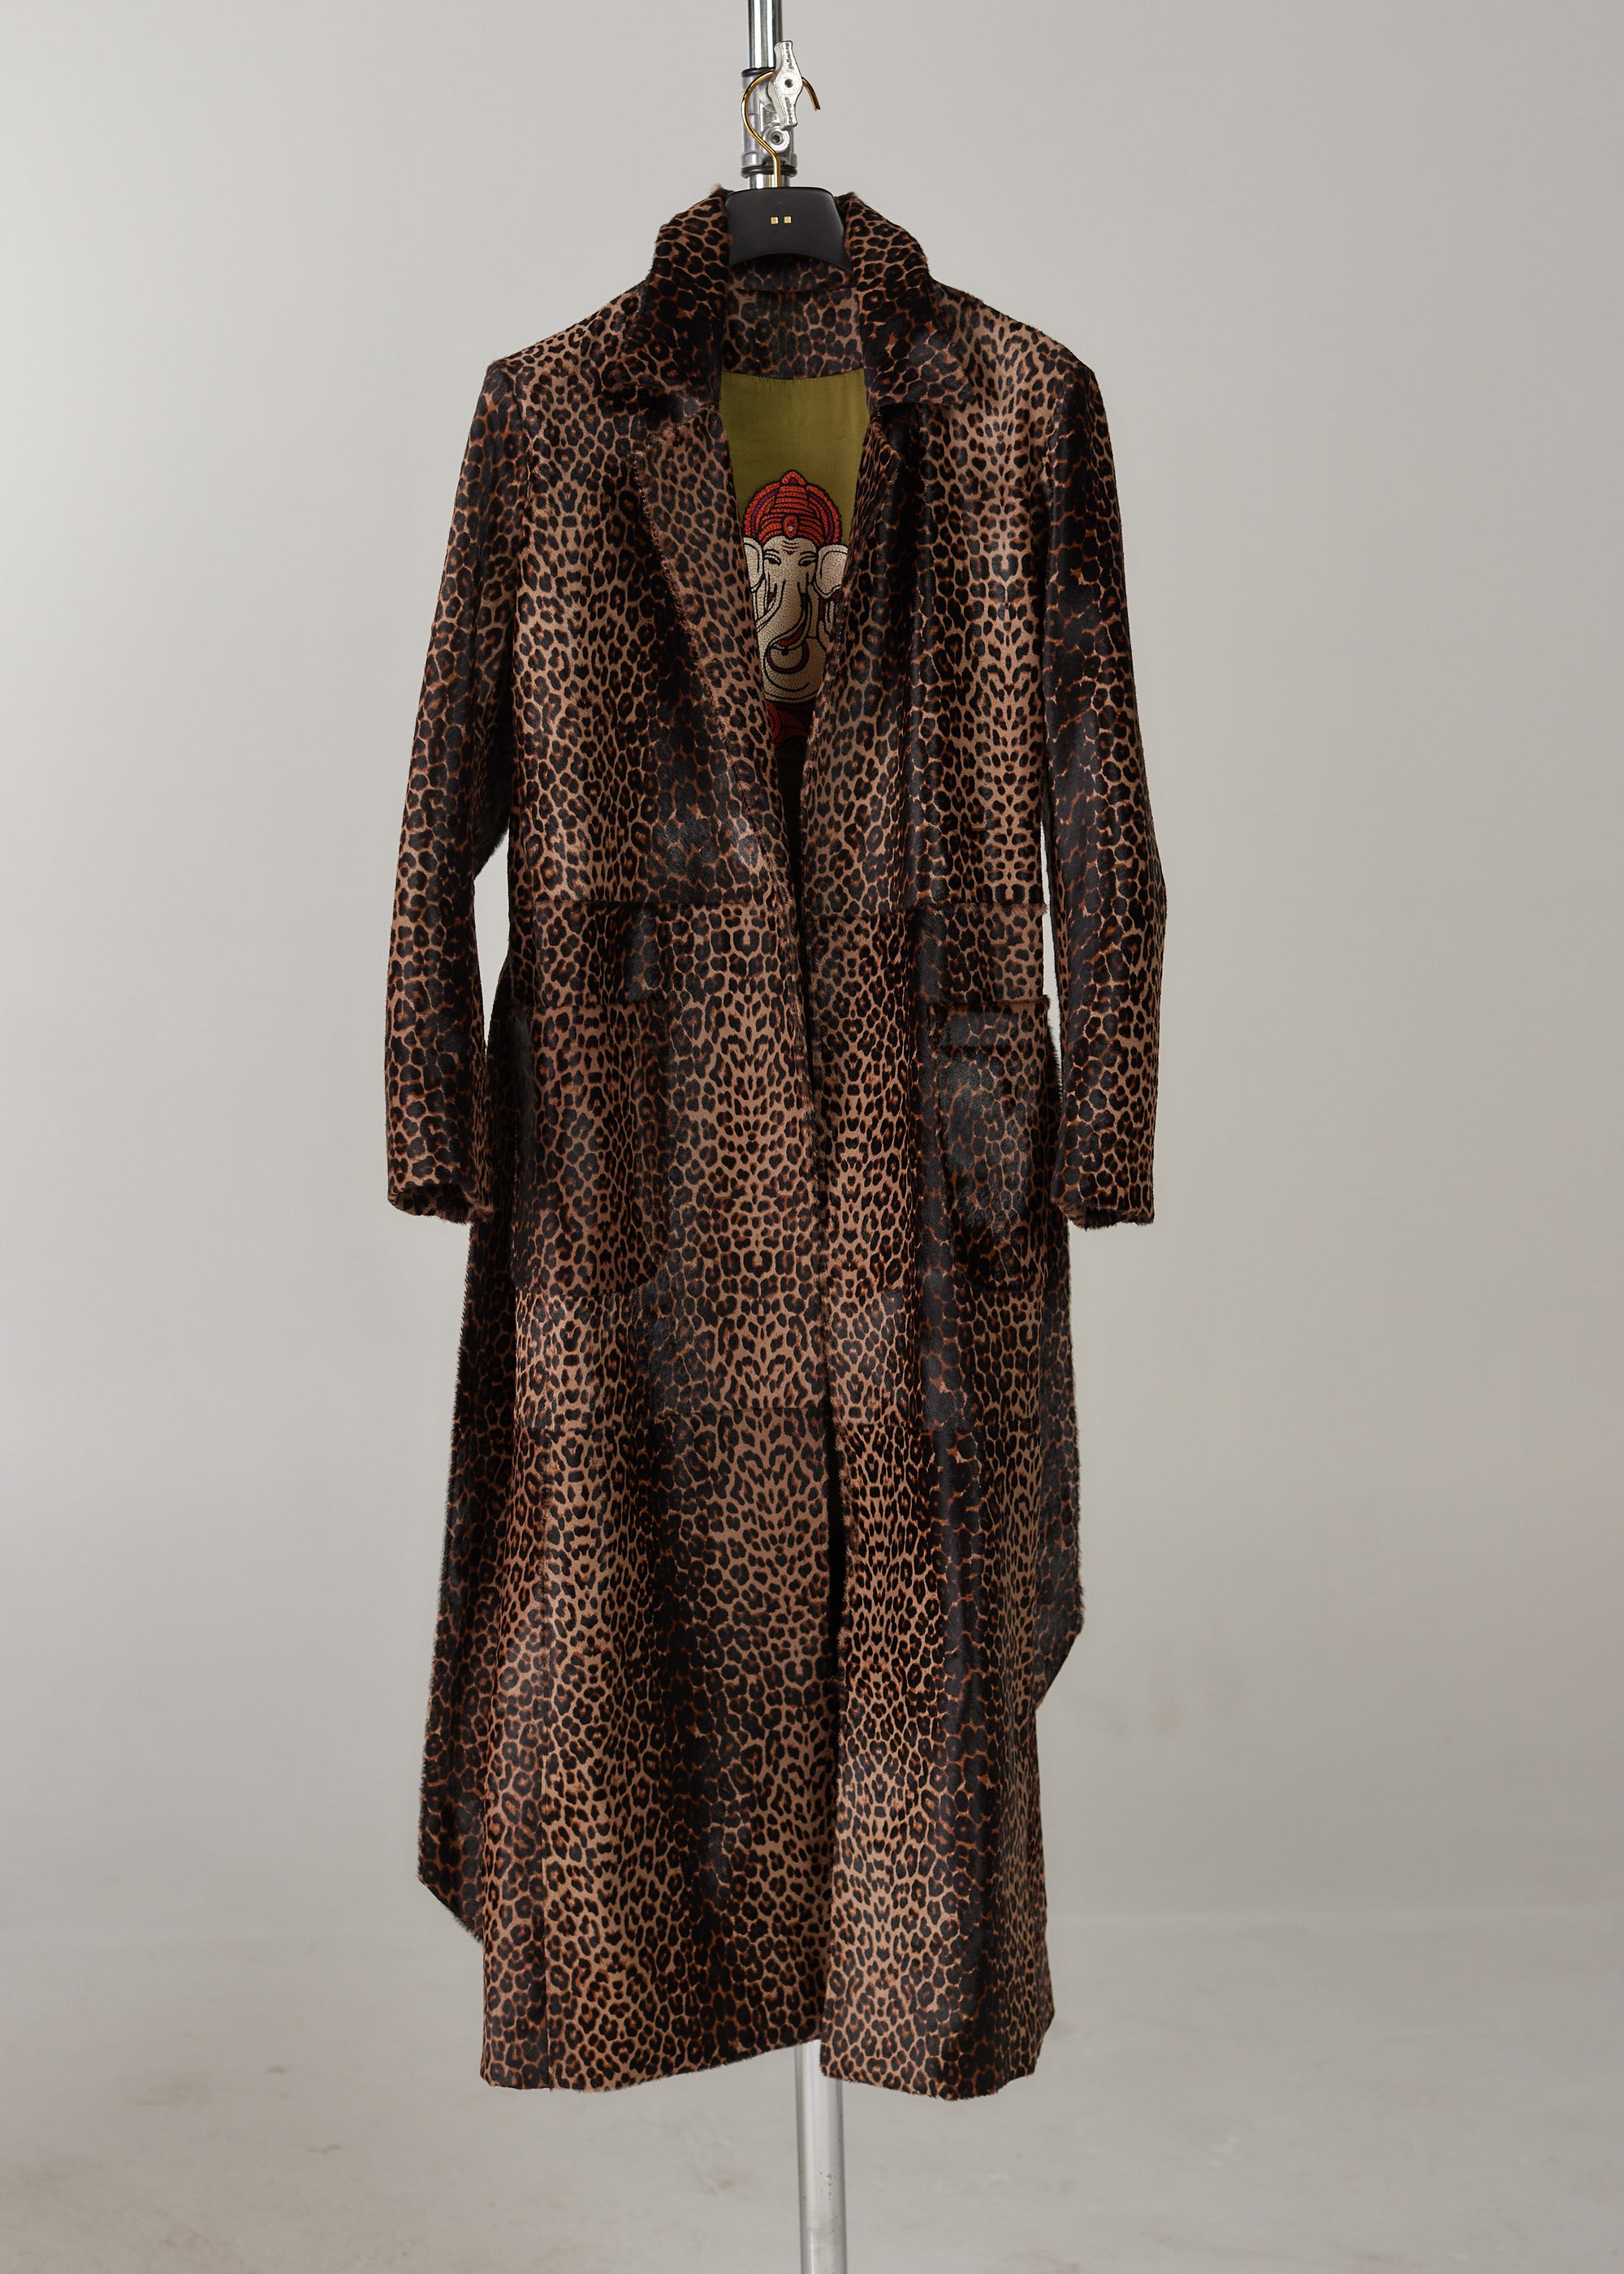 LNO Womens Cheetah Duster Size 8 - SOLD